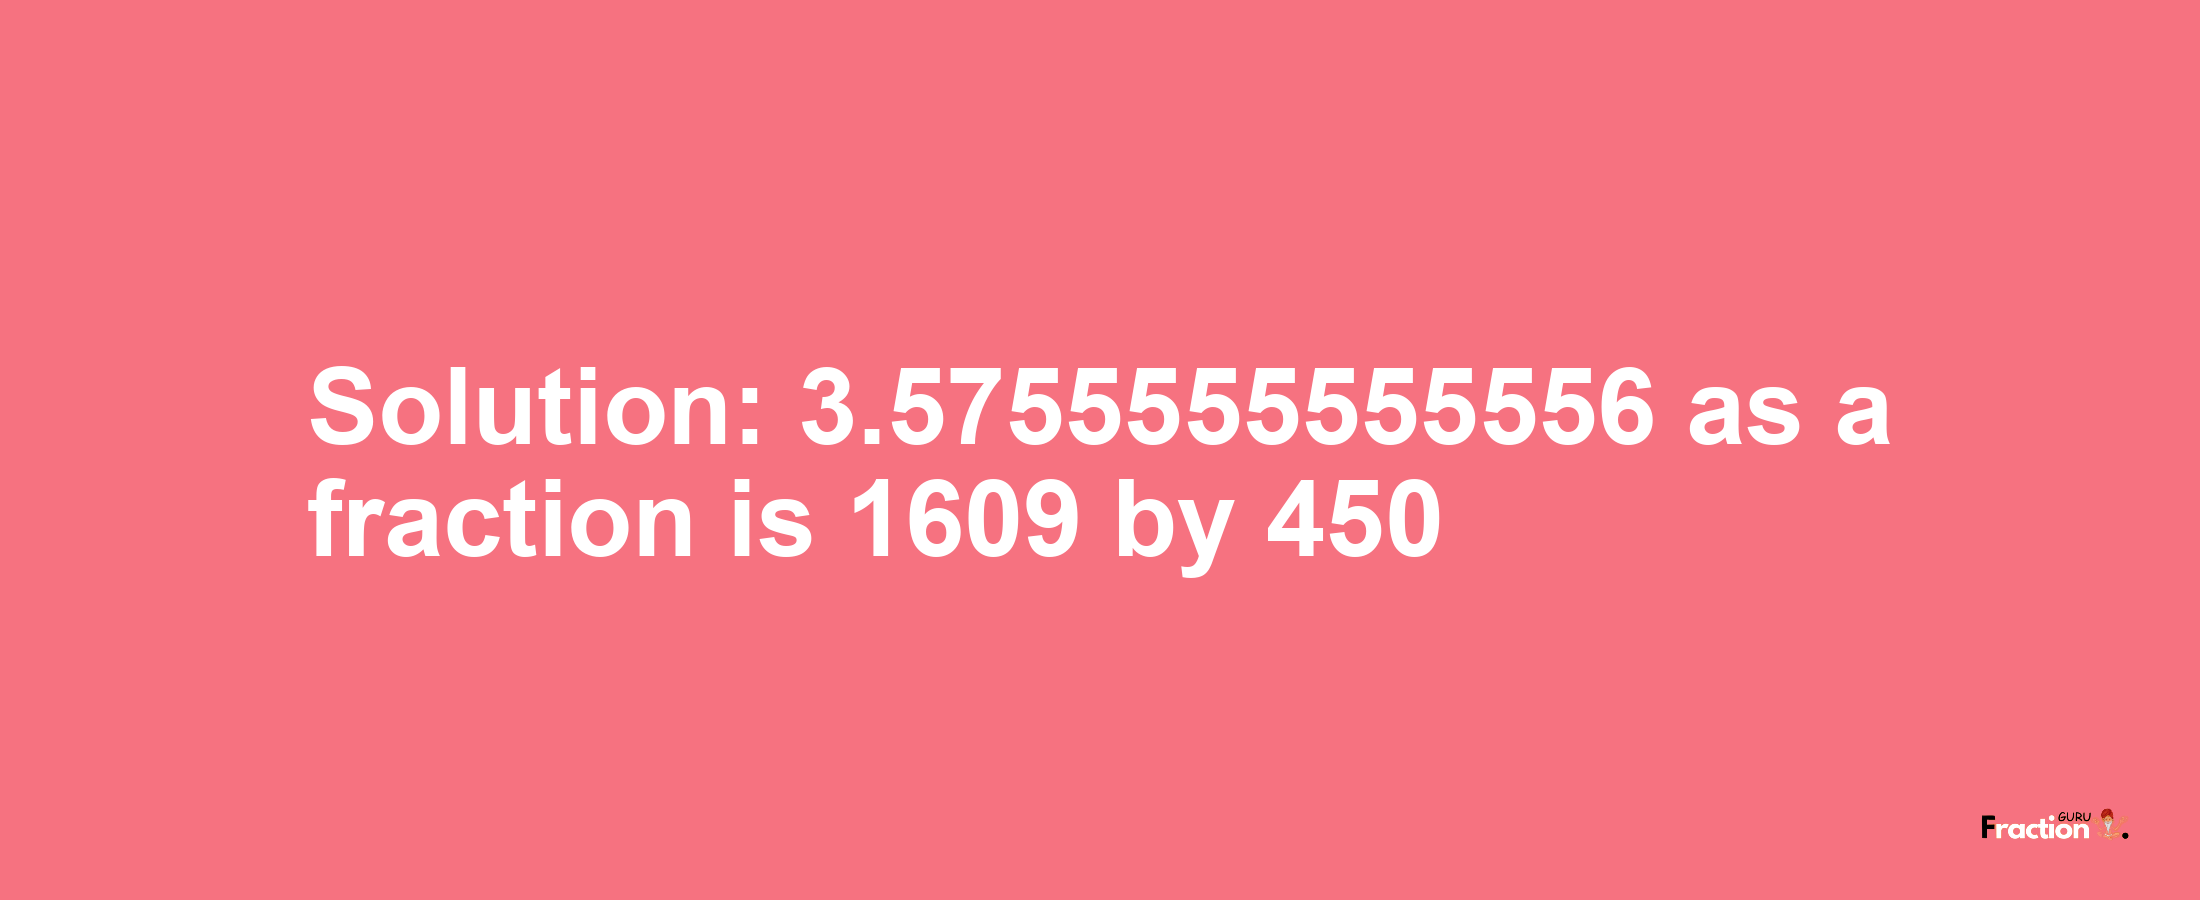 Solution:3.5755555555556 as a fraction is 1609/450